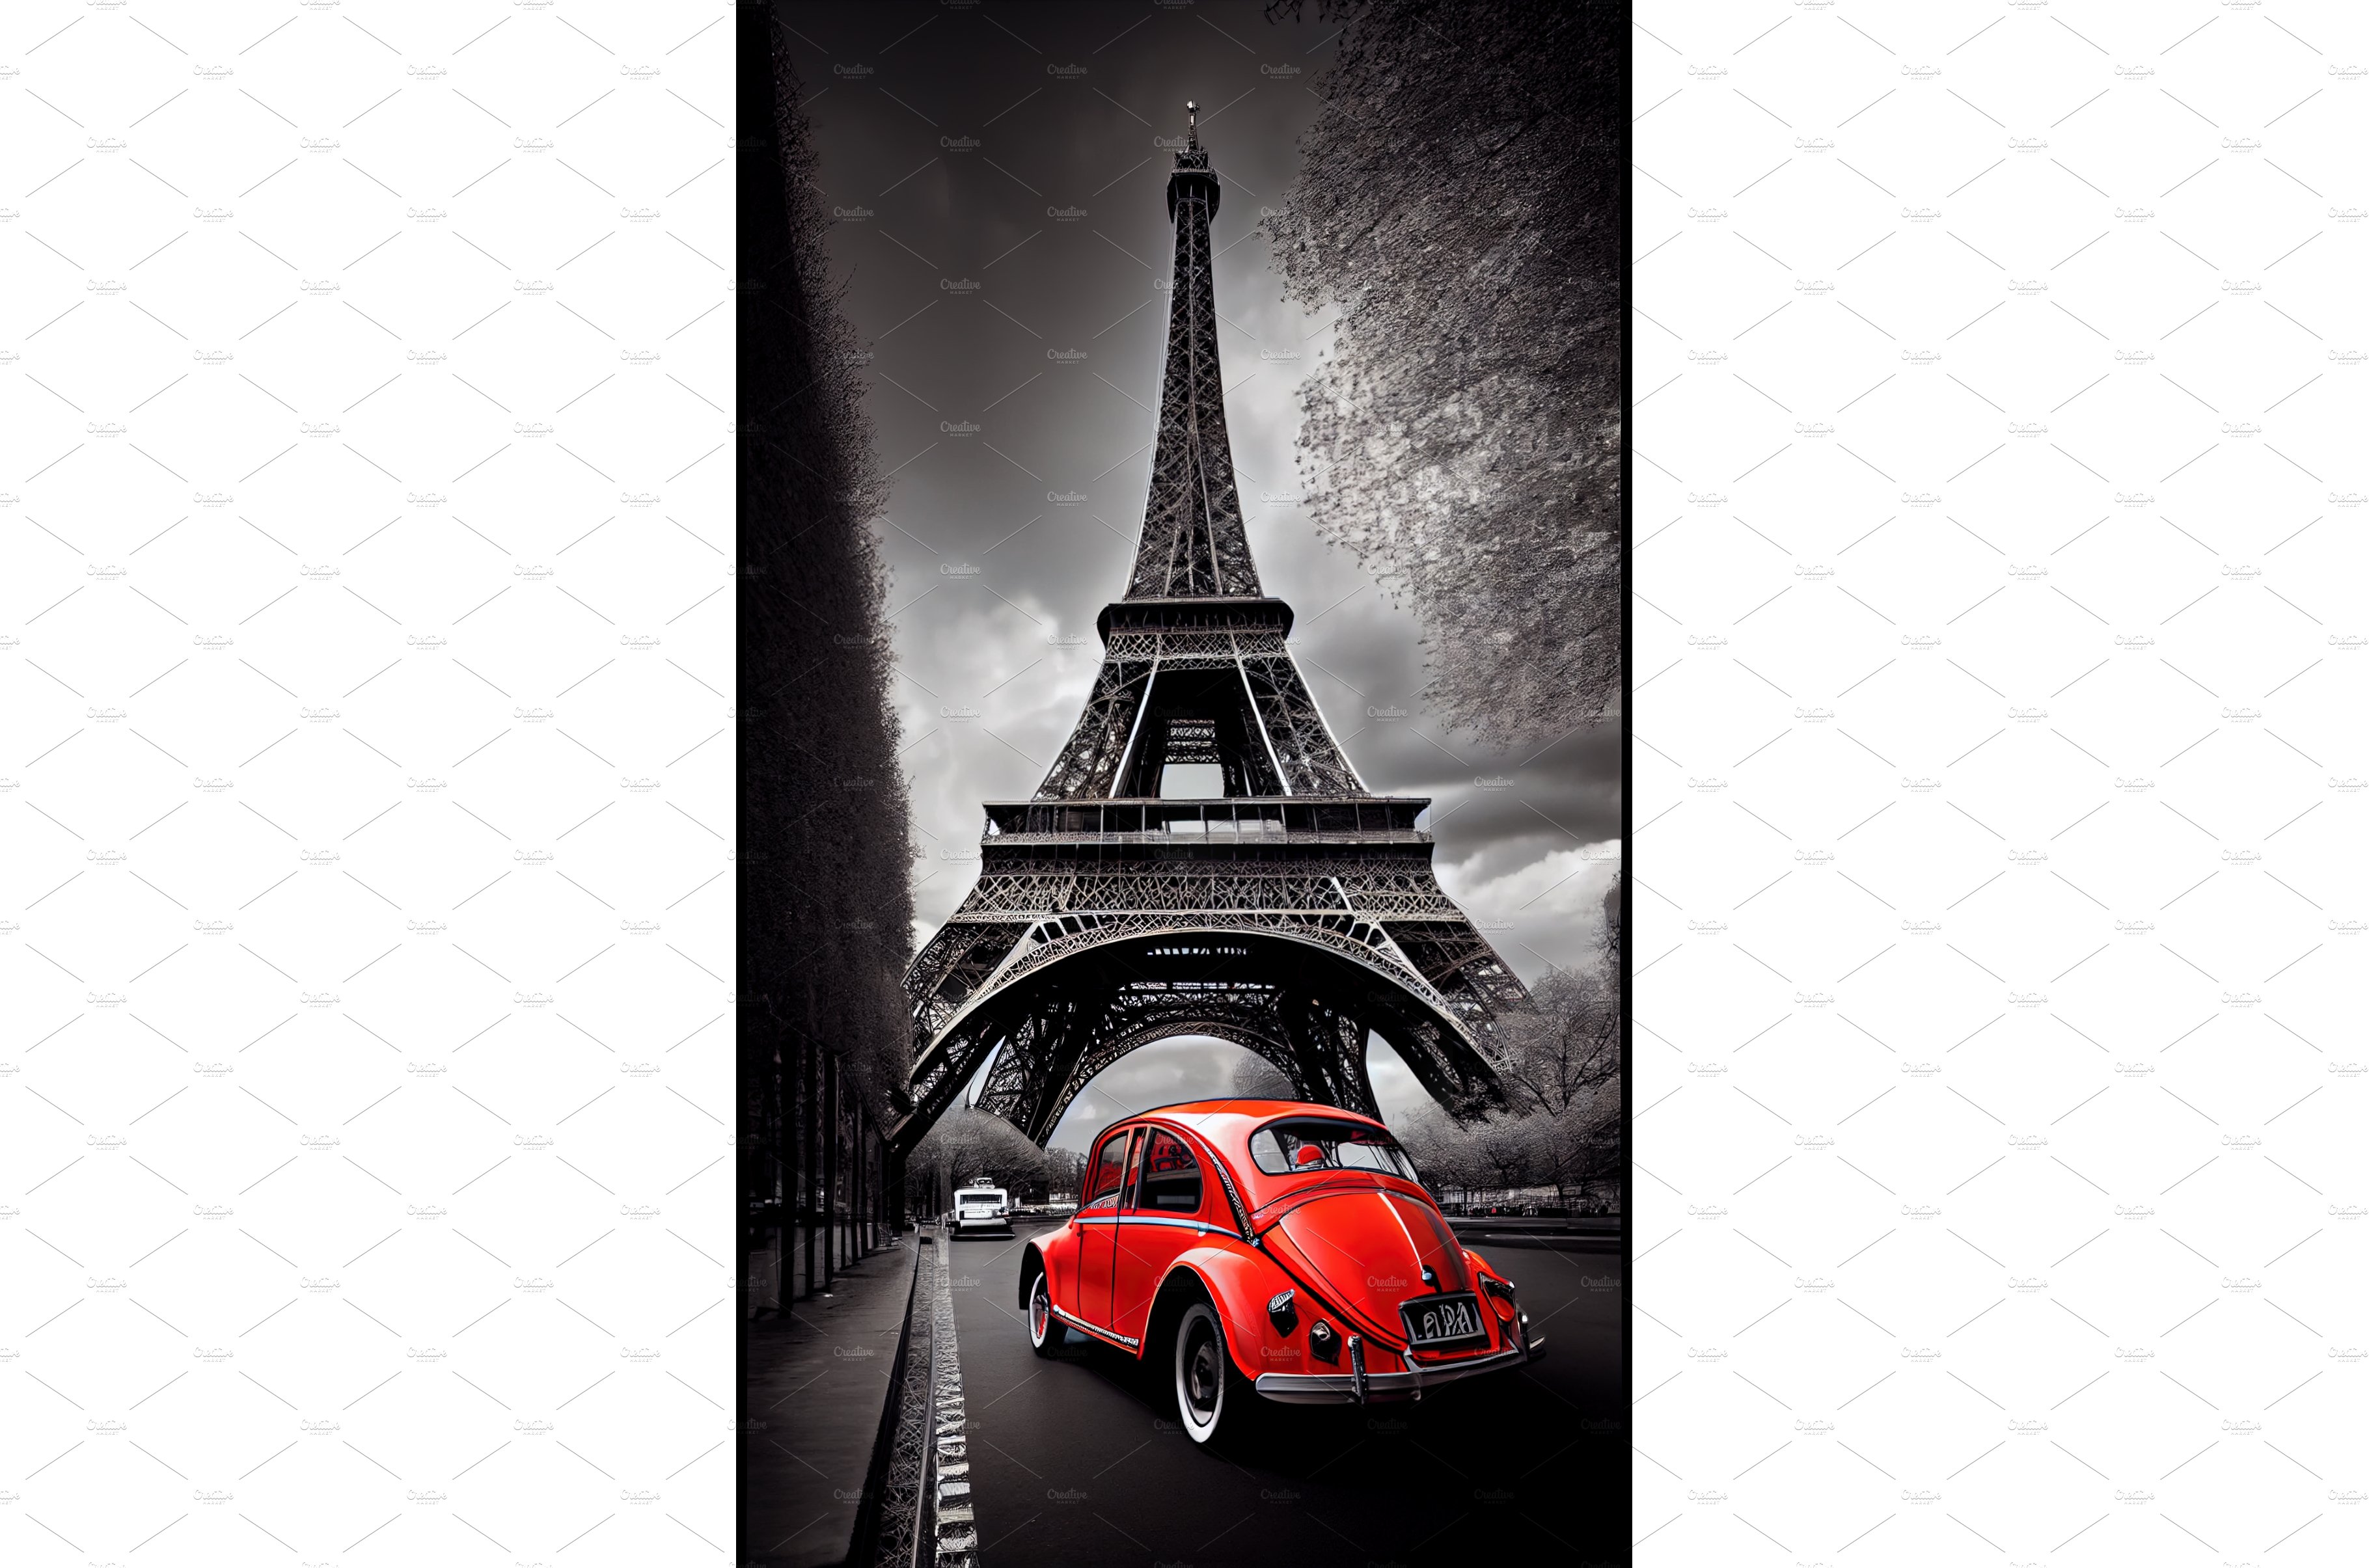 Paris with eiffel tour and red car cover image.